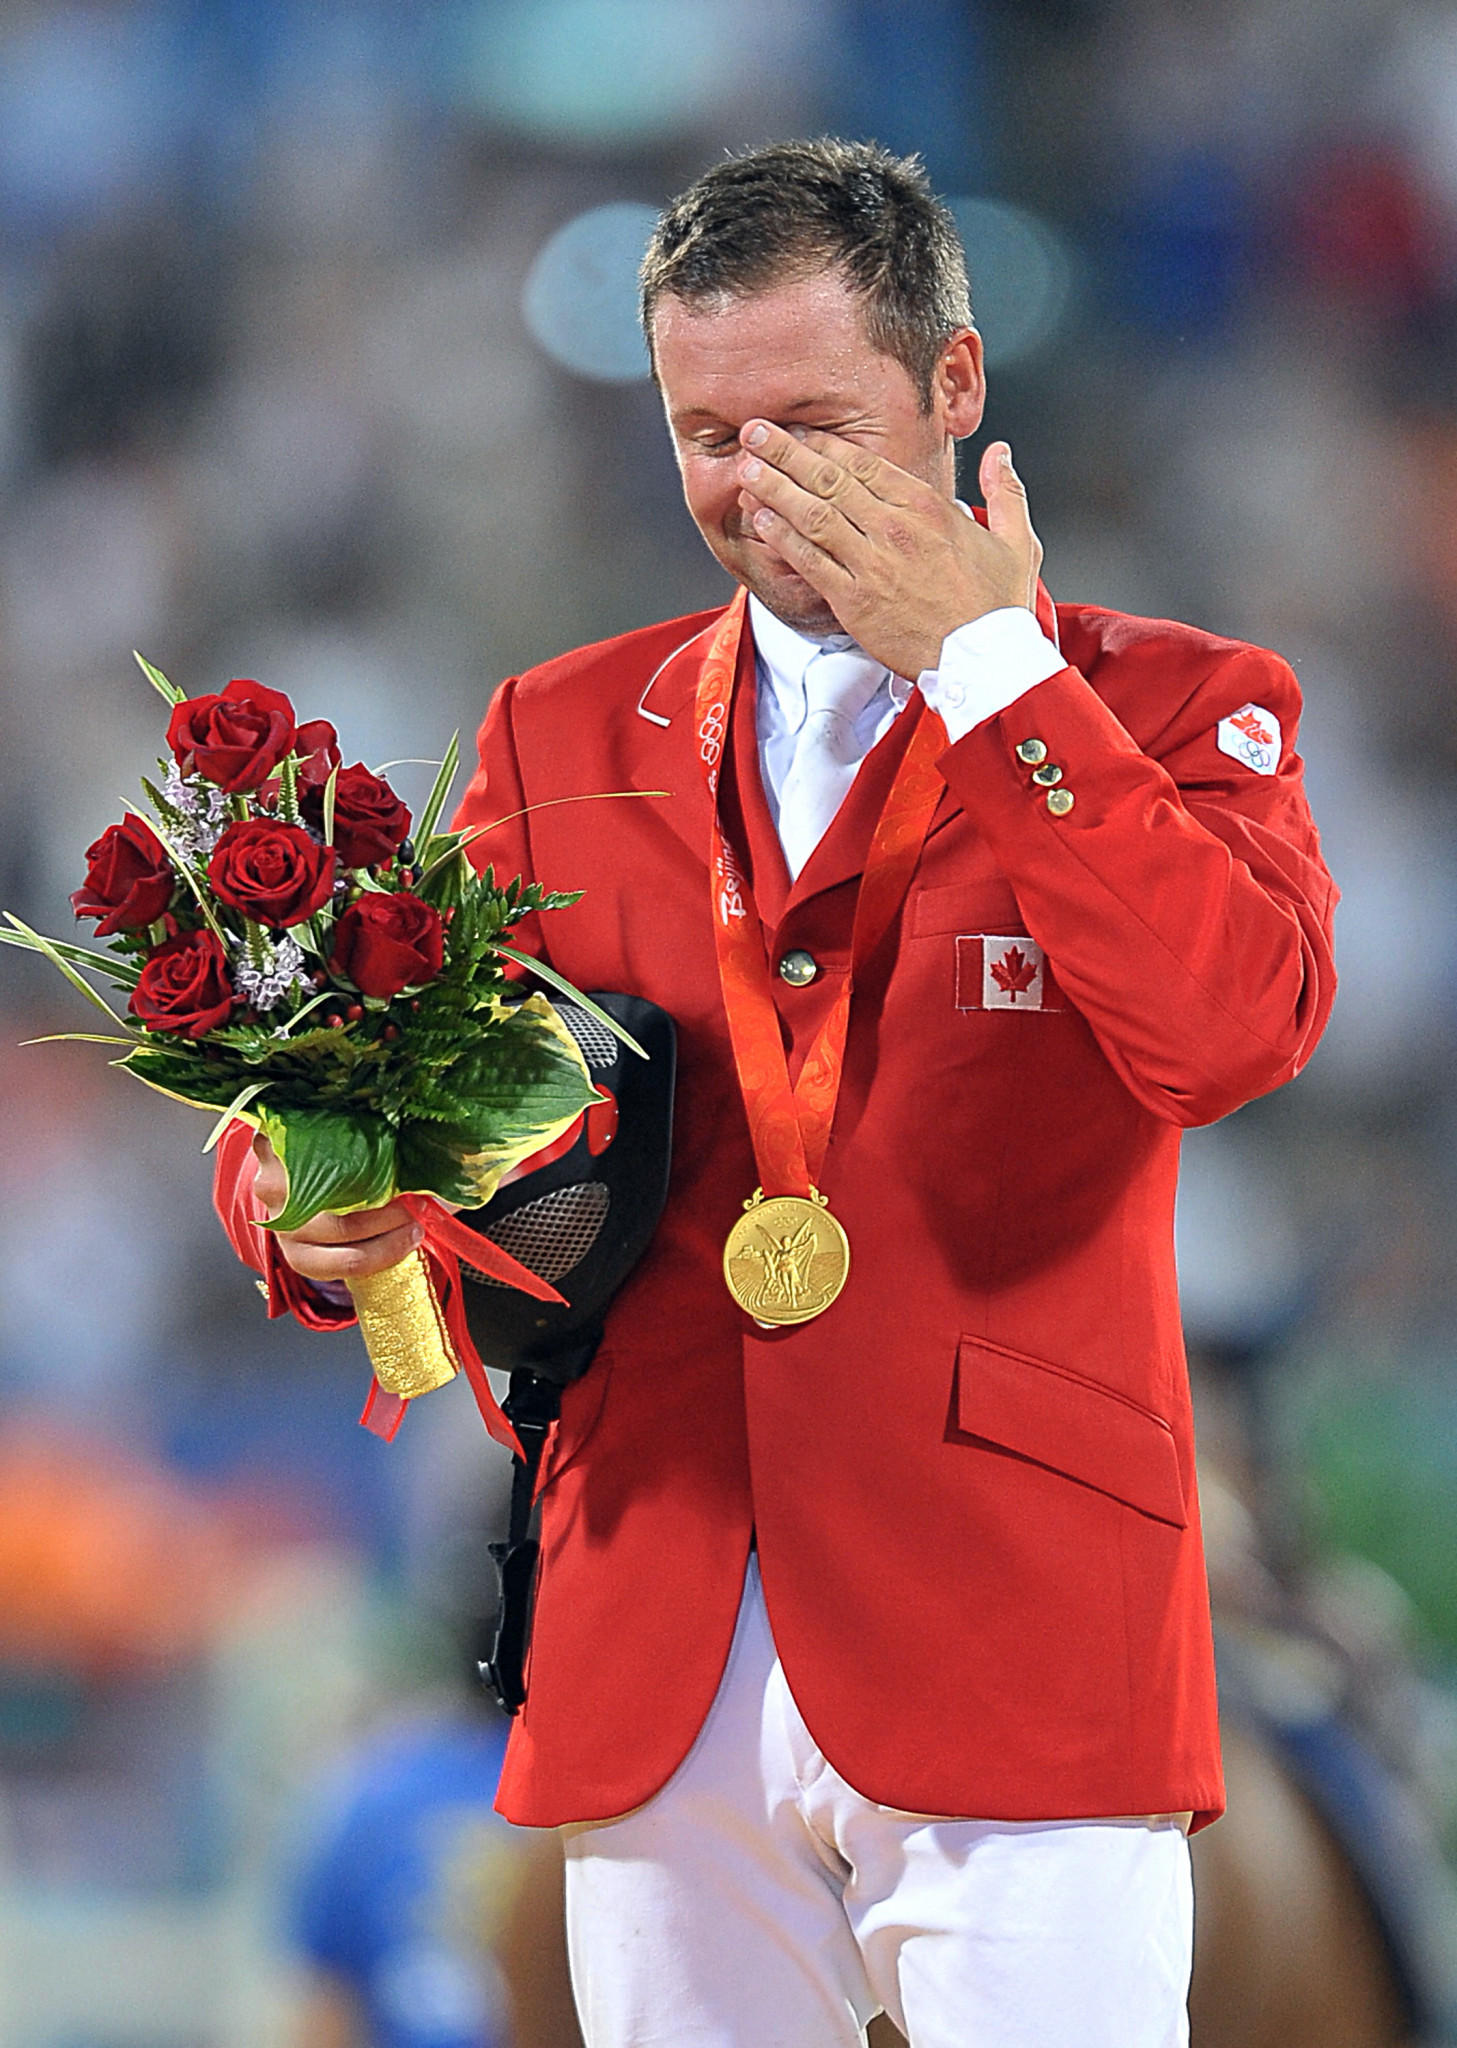 Eric Lamaze won individual jumping gold for Canada at the Beijing 2008 Olympics ©Getty Images